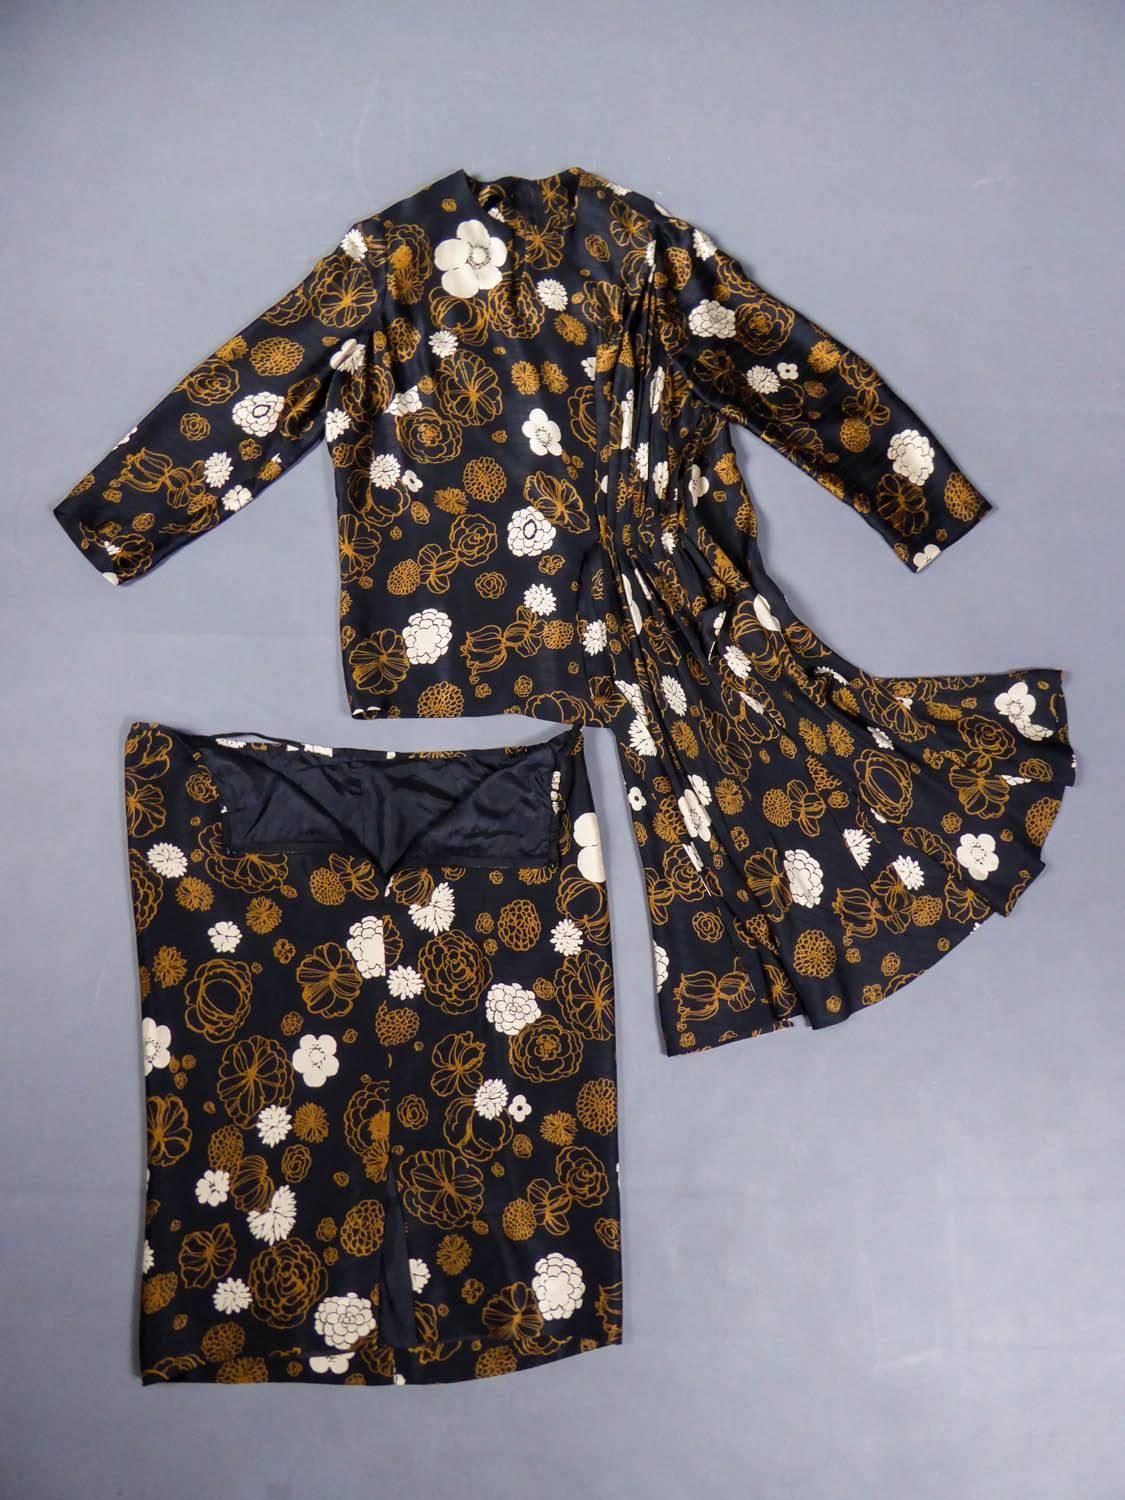 Circa 1980

France

Shirt skirt set Madame Grès Haute Couture from the 80s. Black silk satin with a matte and shiny effect, printed with light brown and white flowers. Asymmetrical pleated effect with small train on the hips. Blouse with long